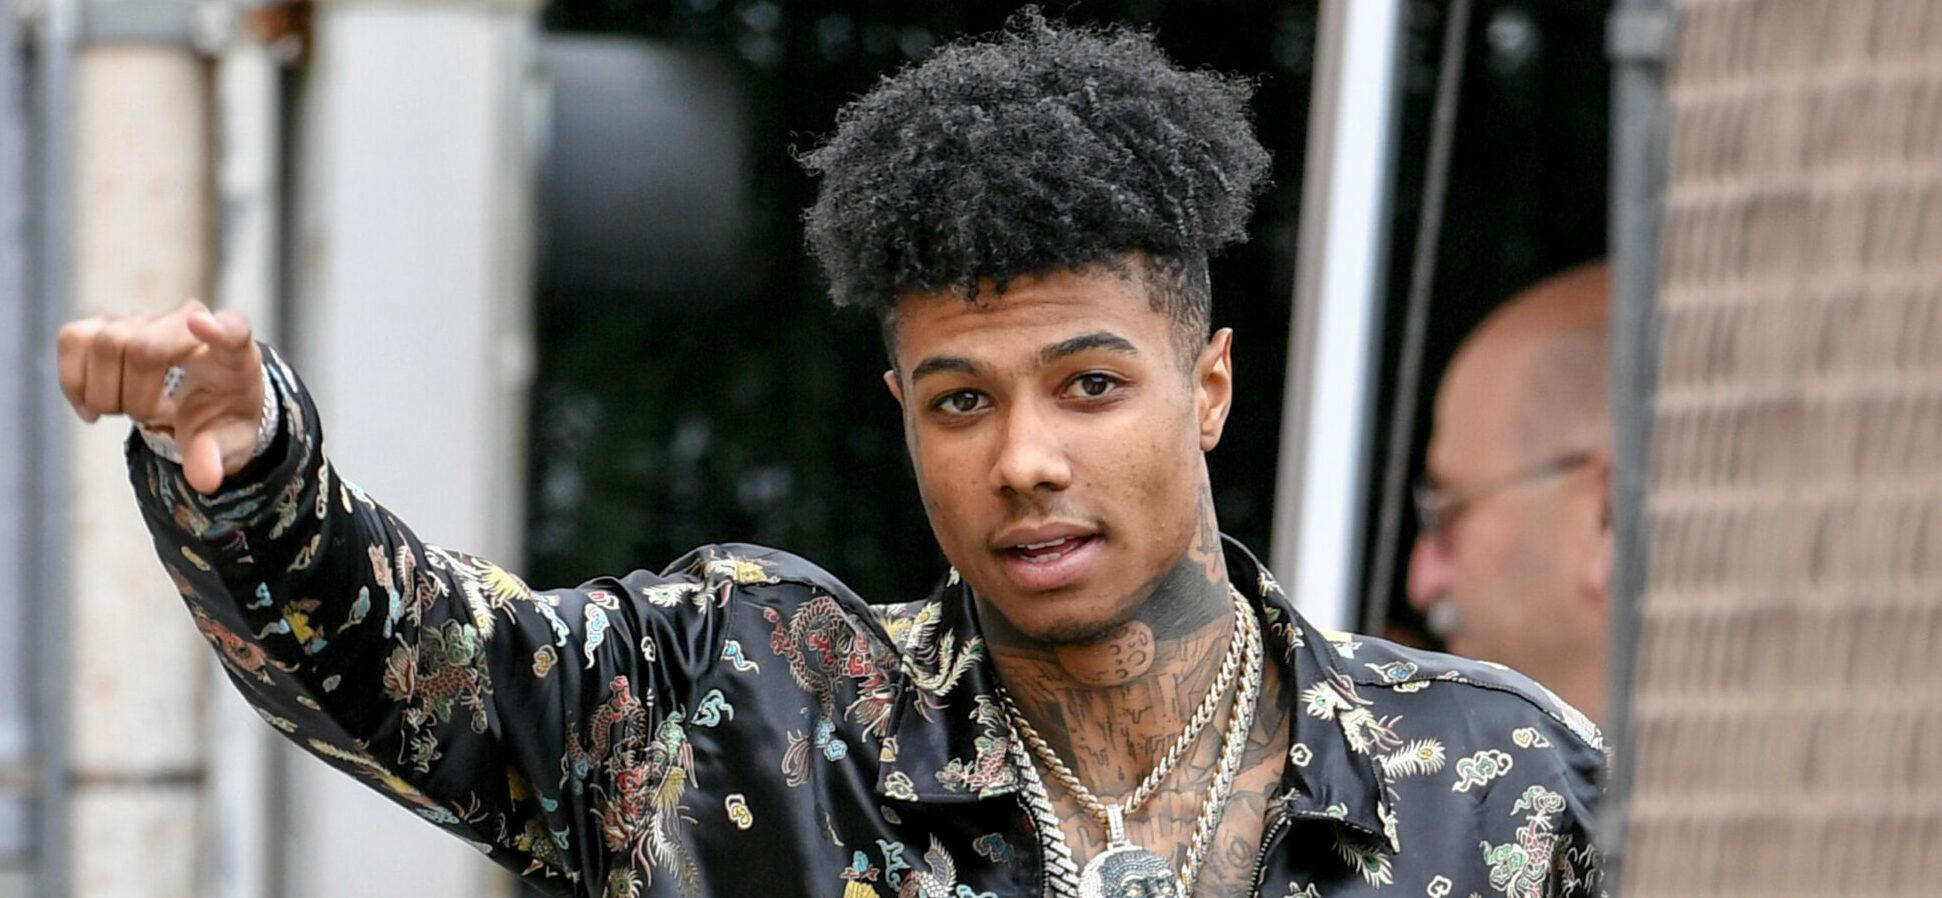 Blueface Reportedly STILL Has Custody Of His Son After Visit From Child Services Over Stripper Video